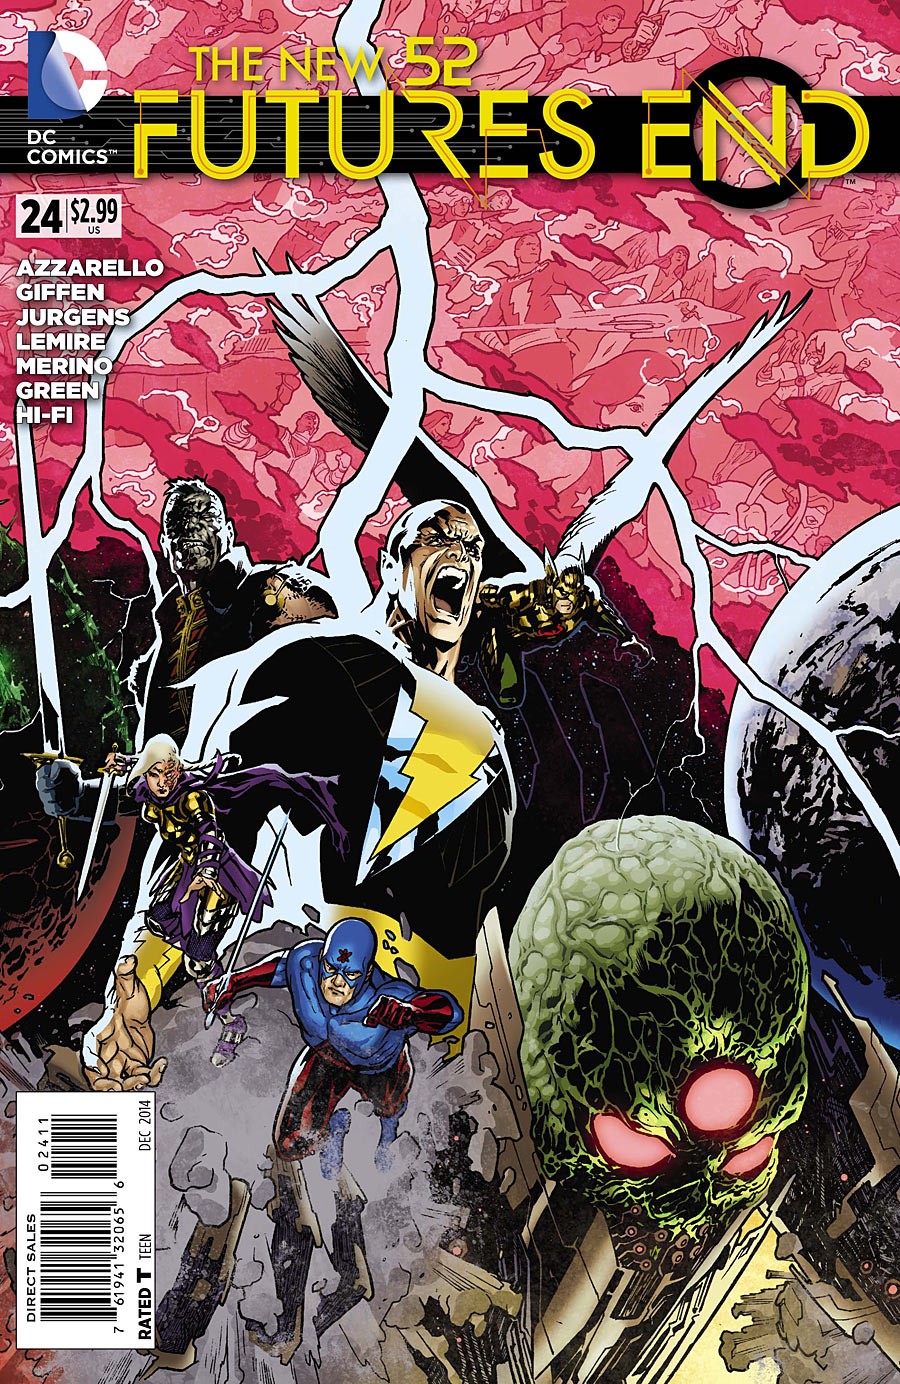 The New 52: Futures End Vol. 1 #24